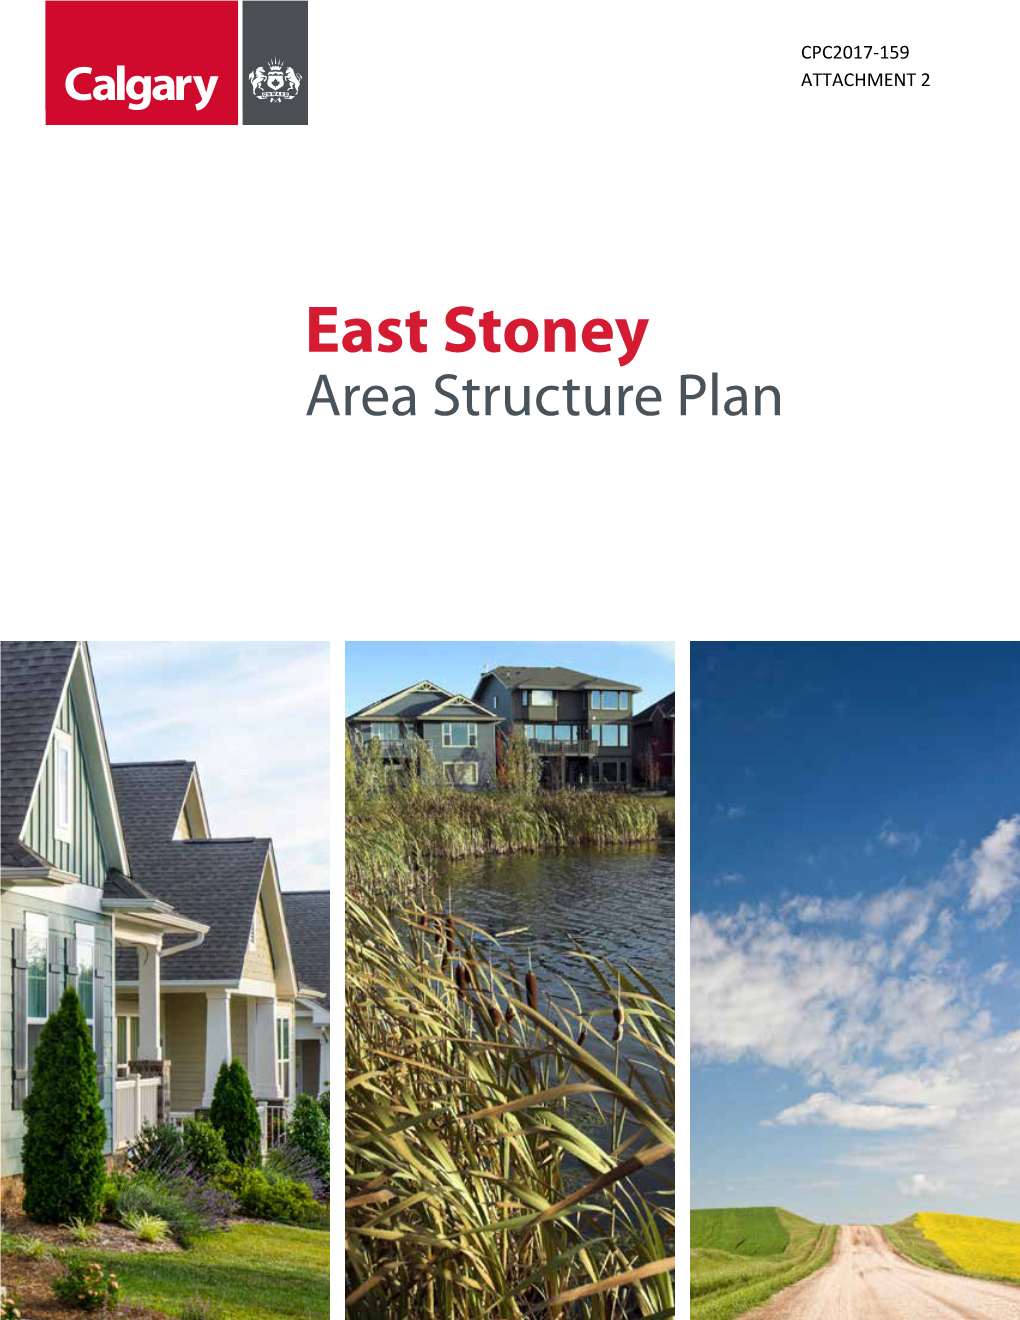 East Stoney Area Structure Plan Publishing Information